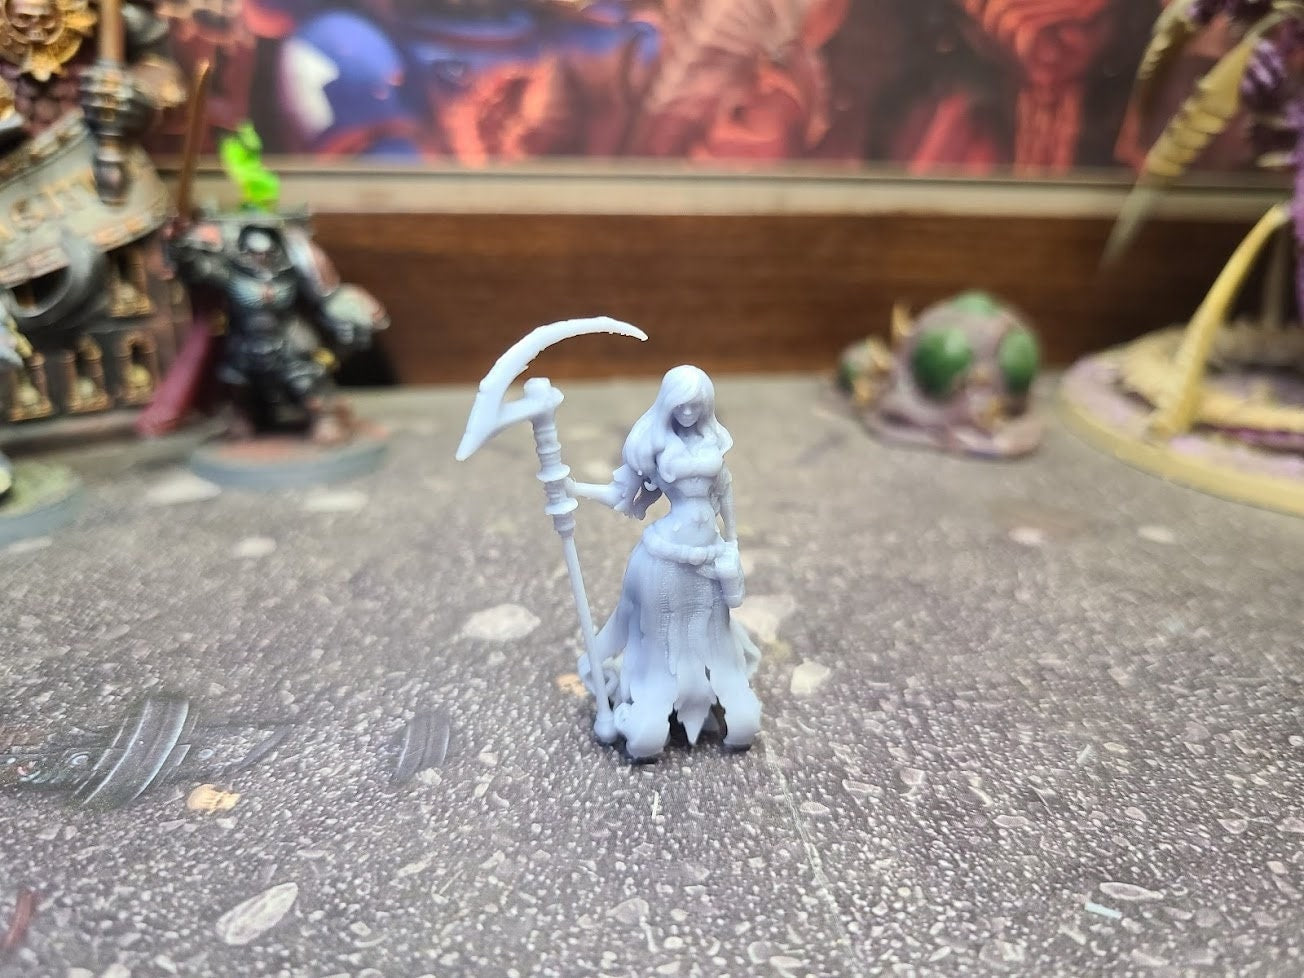 Avatar of Death | Tabletop Roleplaying Miniatures | 28mm Scale